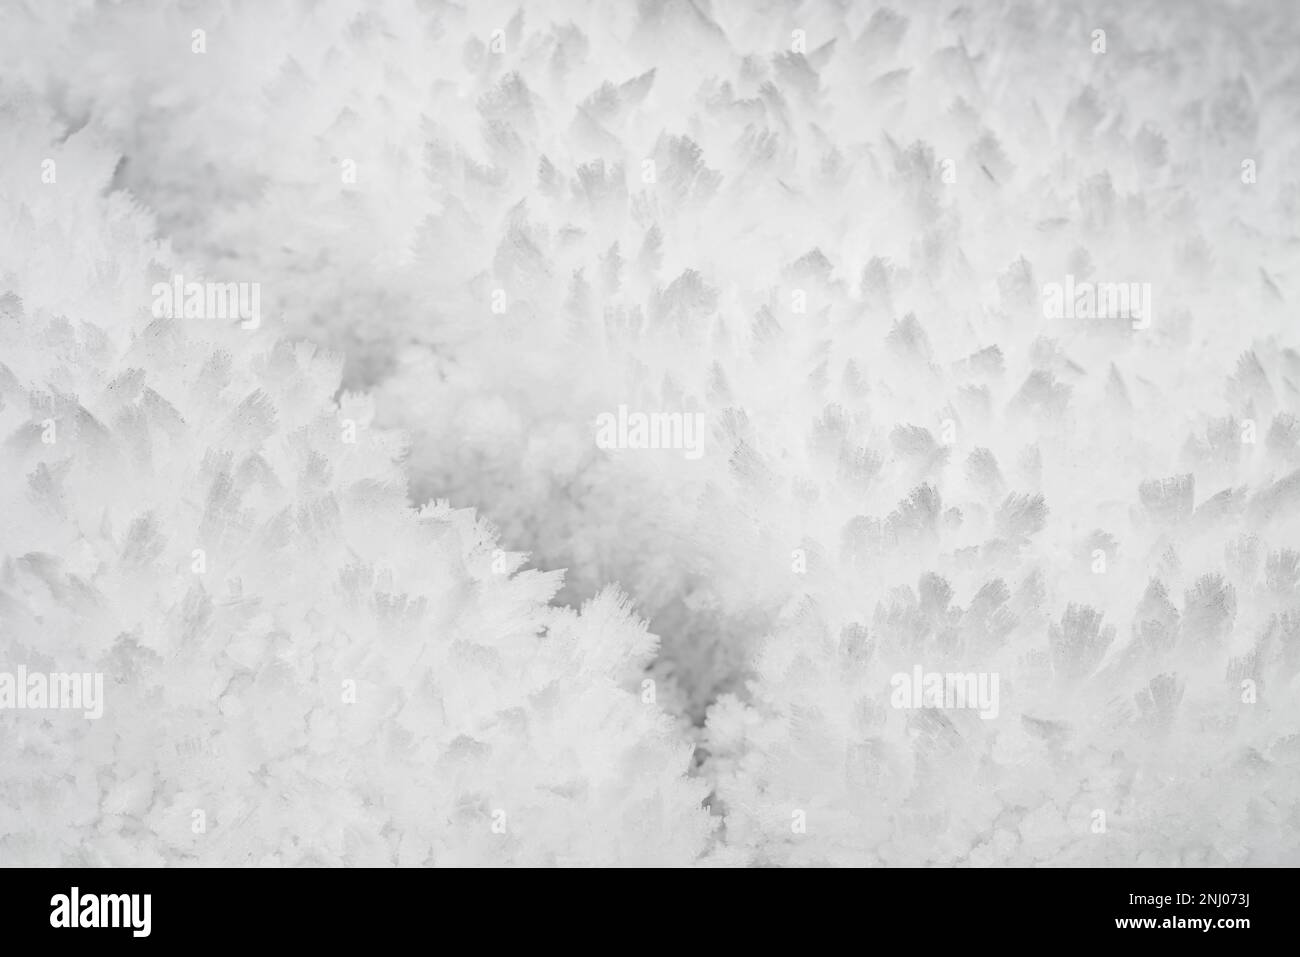 Harsh freezing hoar fog moisture makes water droplets turn directly from water to solid state like feathery beard coating surfaces sublimation process Stock Photo